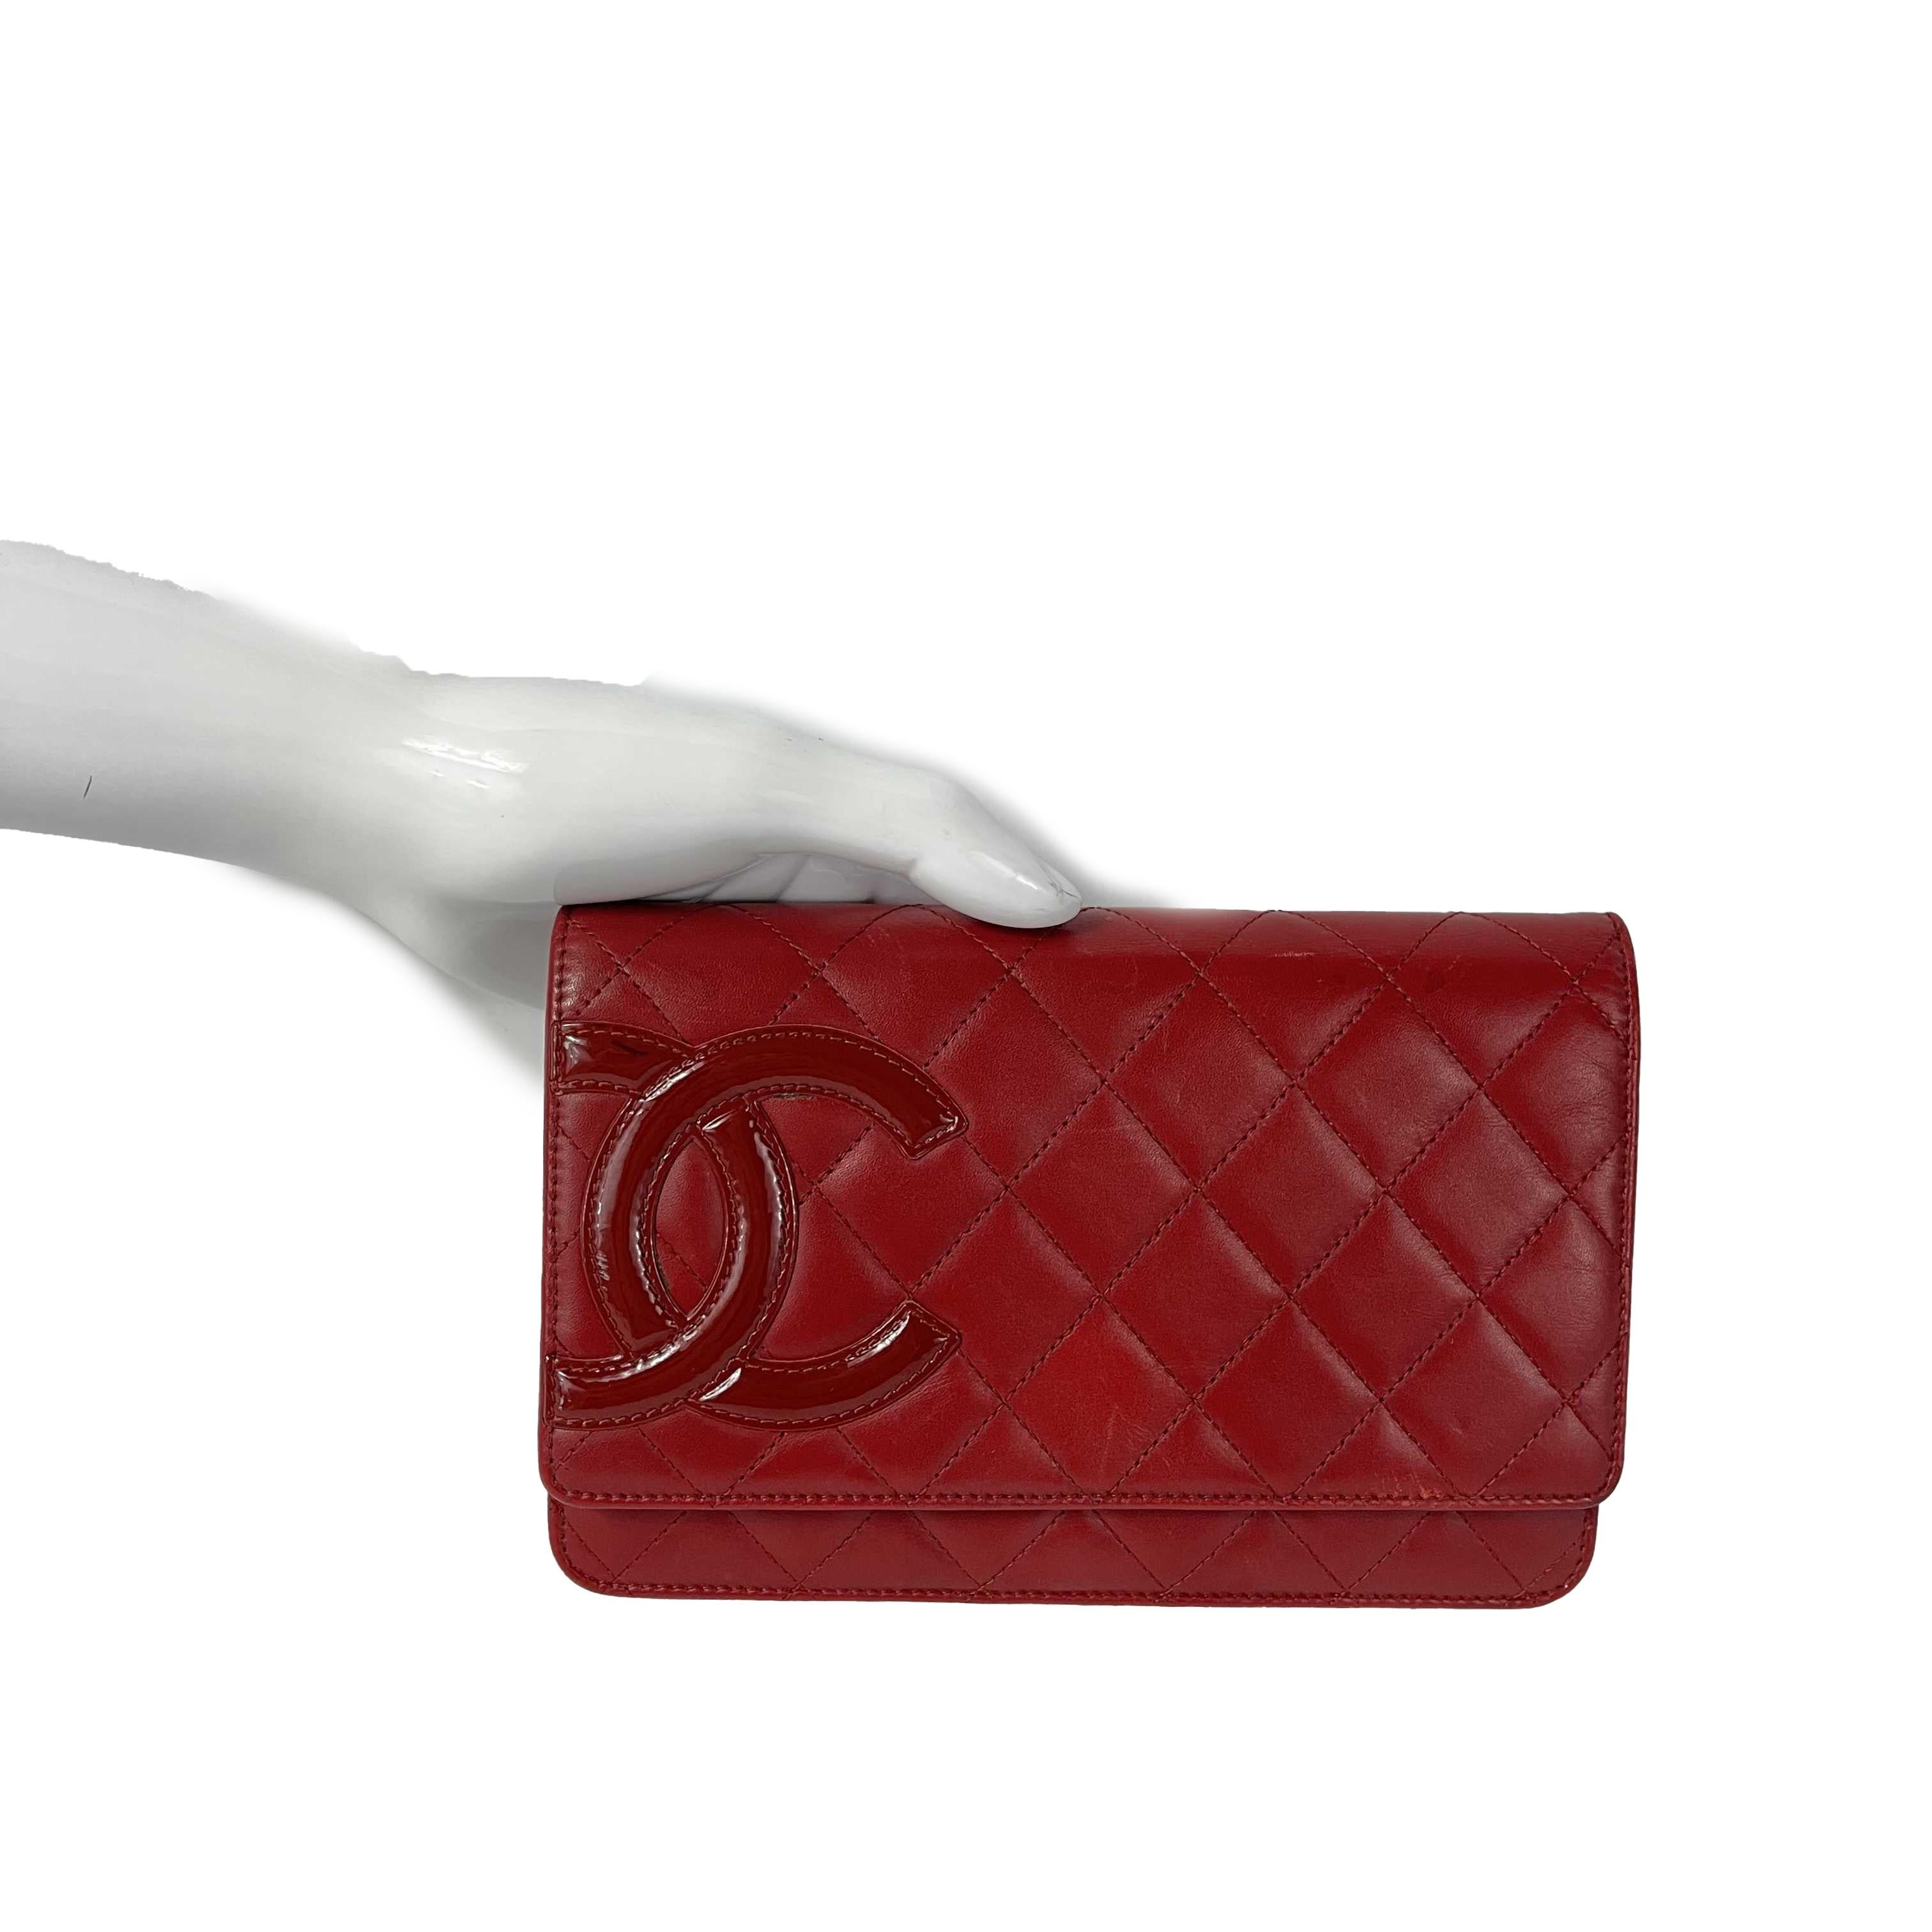 CHANEL Calfskin Quilted Cambon Red / Silver Wallet On Chain Crossbody In Excellent Condition For Sale In Sanford, FL